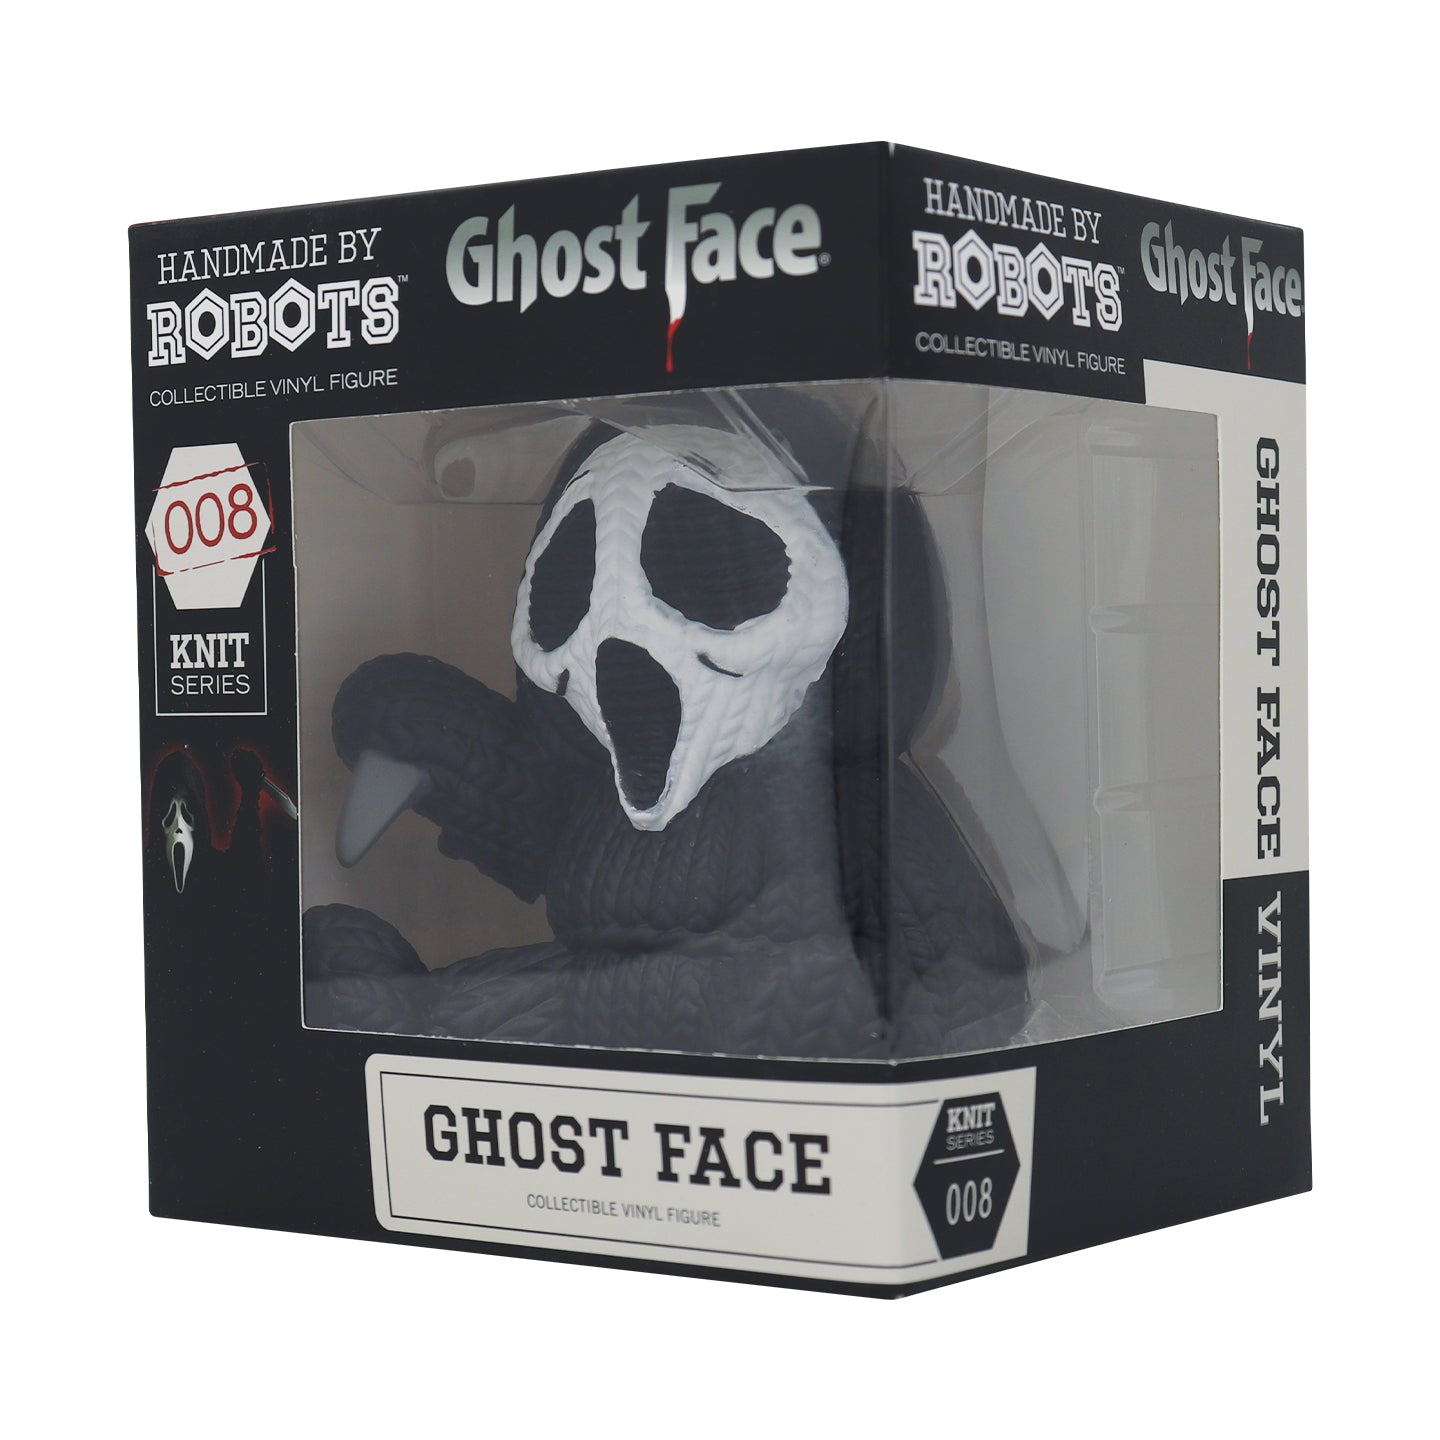 Ghostface Collectible Vinyl Figure from Handmade By Robots